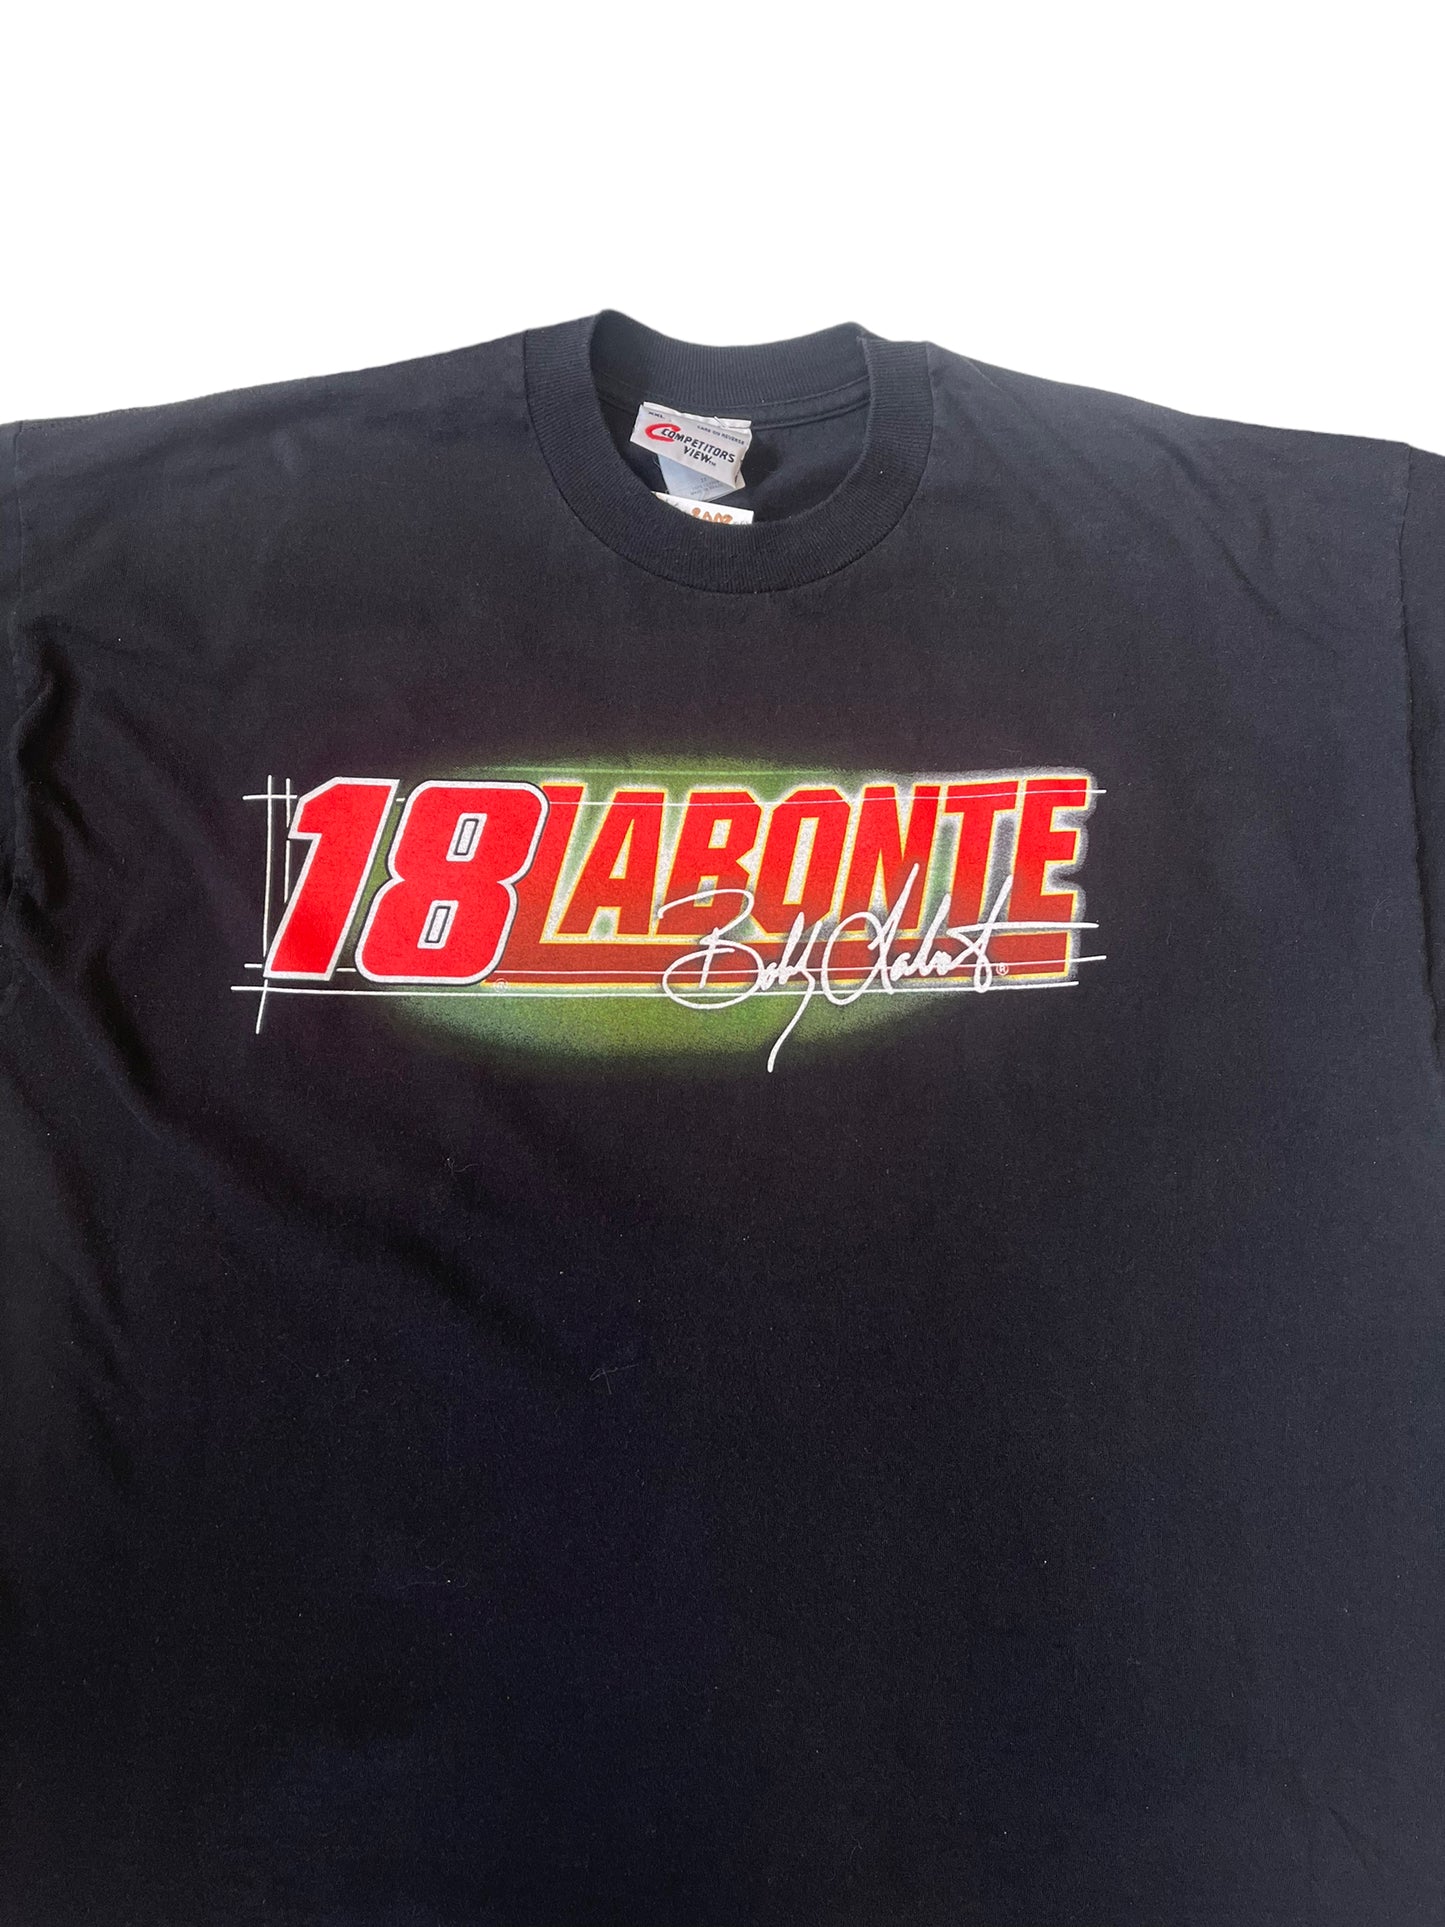 (XL) 2002 Bobby Labonte Double Sided Tee